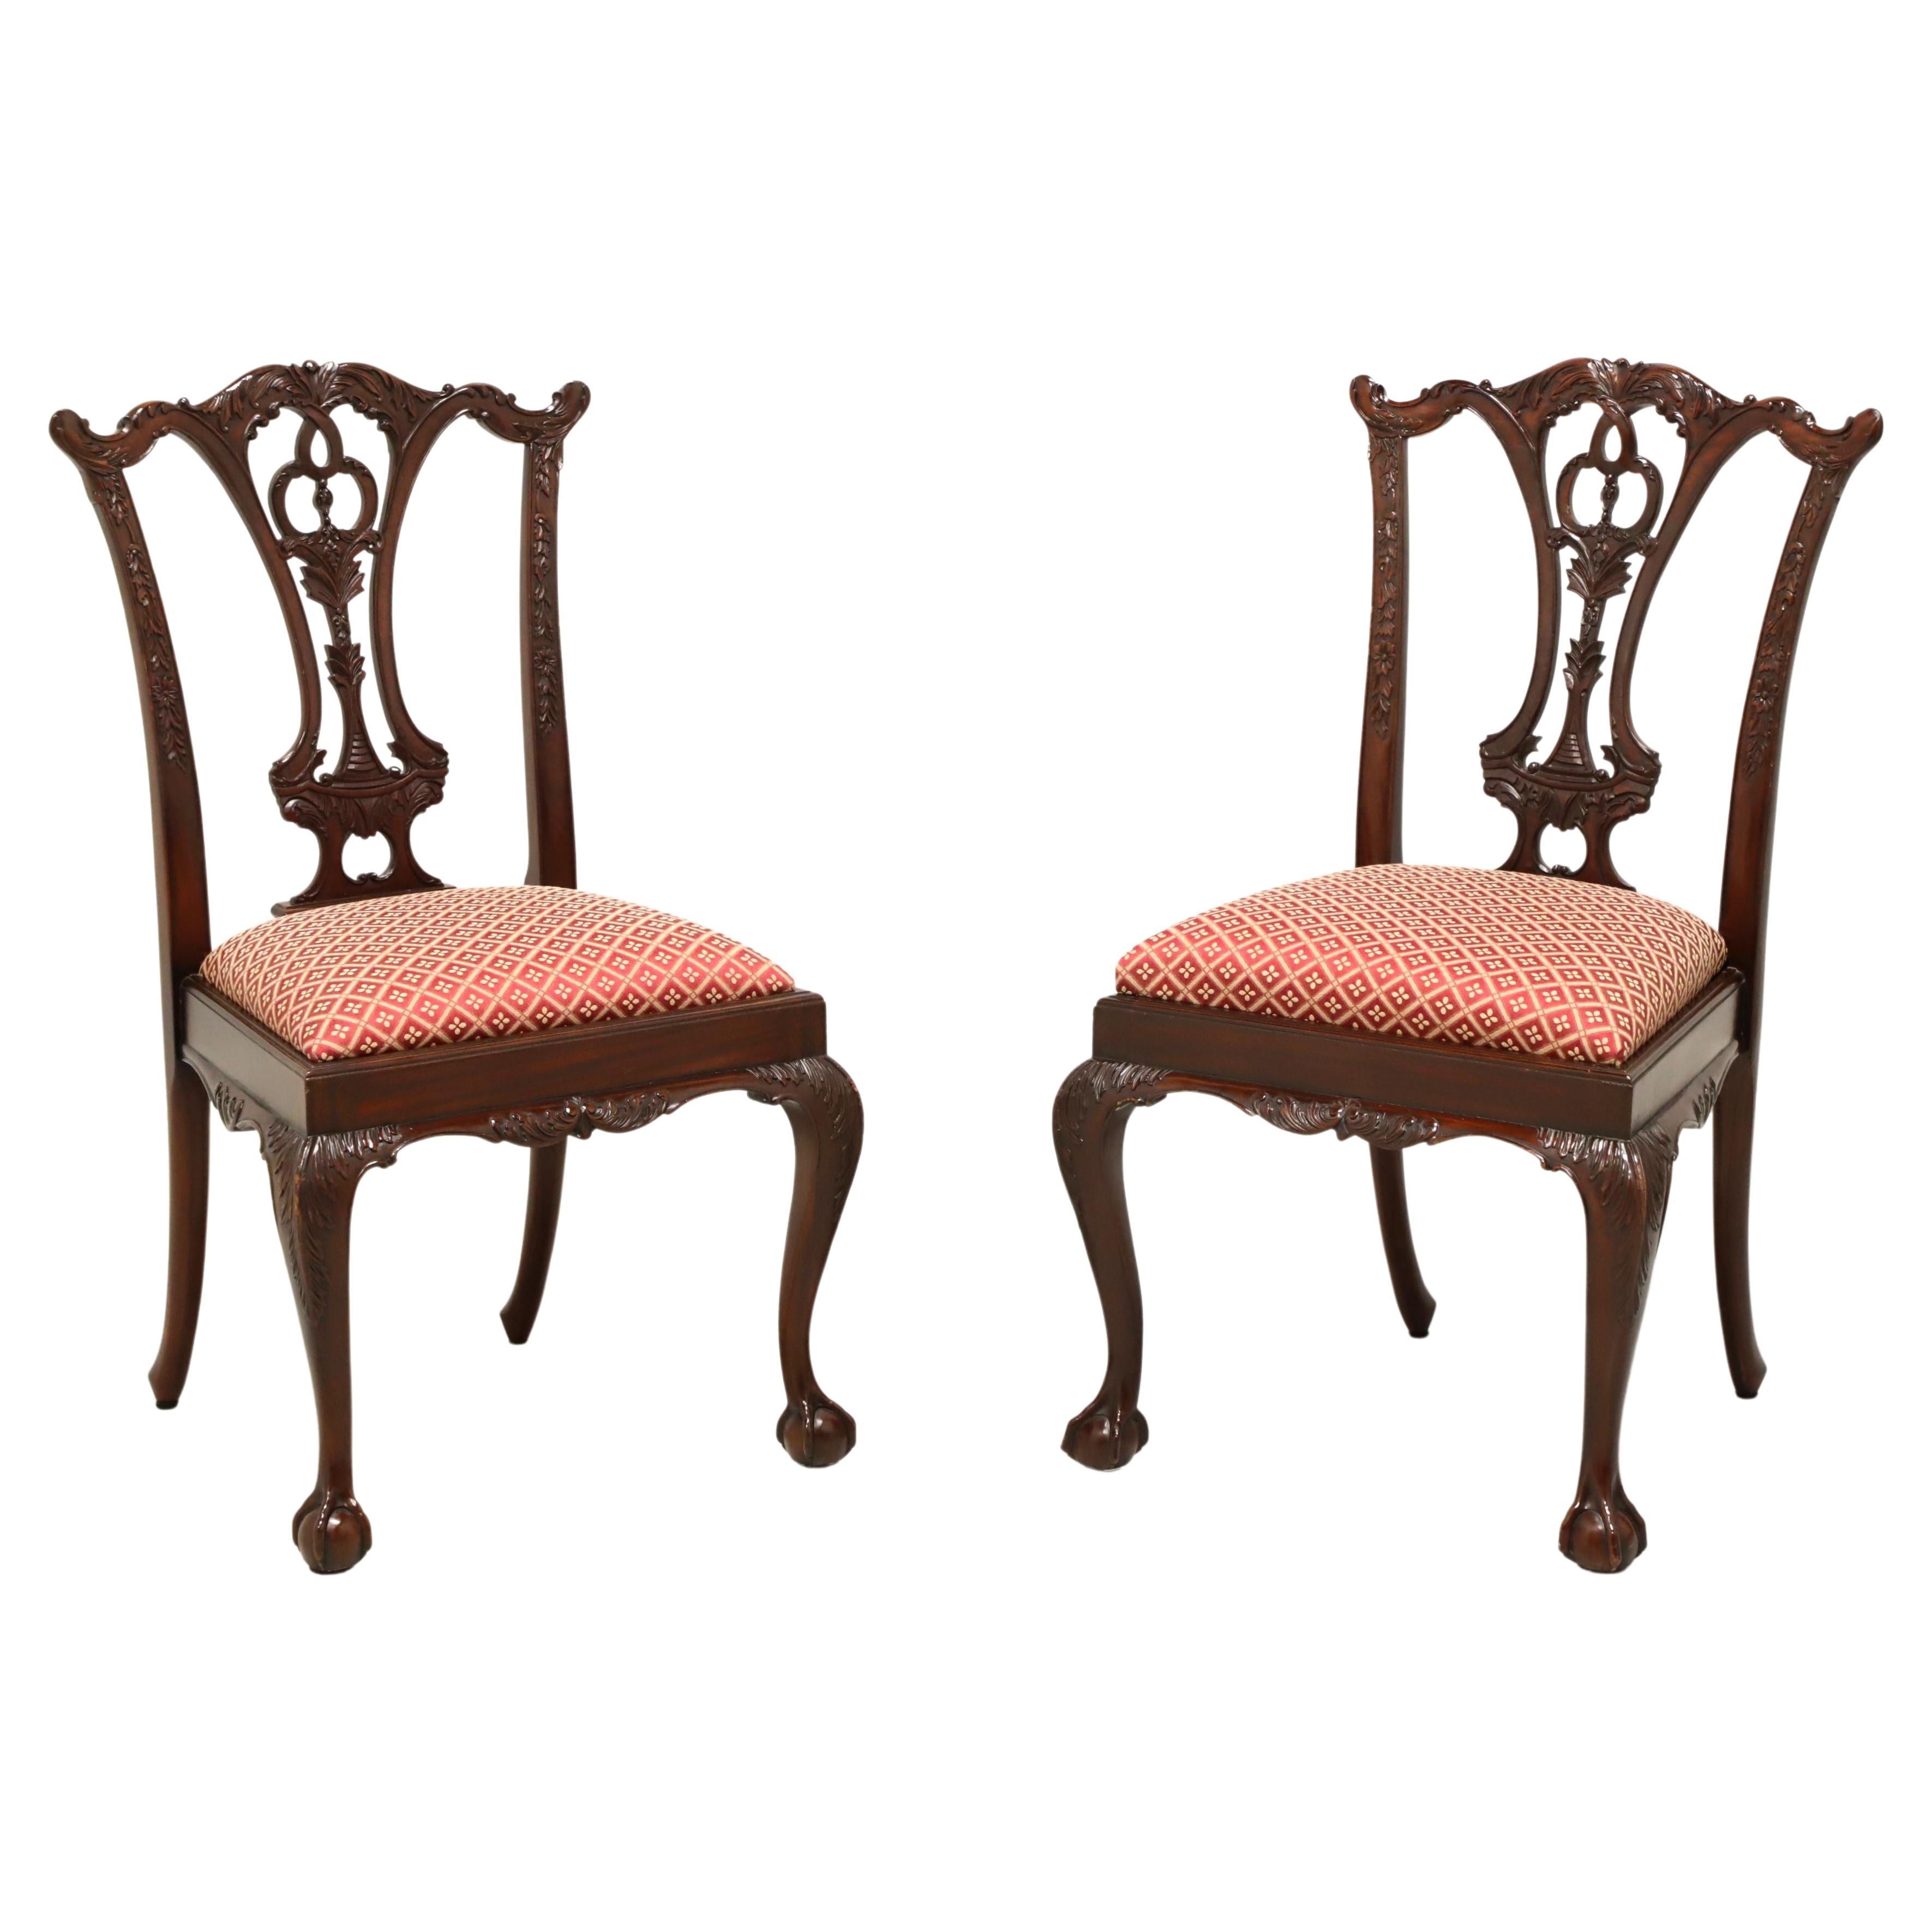 MAITLAND SMITH Mahogany Chippendale Ball in Claw Dining Side Chairs - Pair 